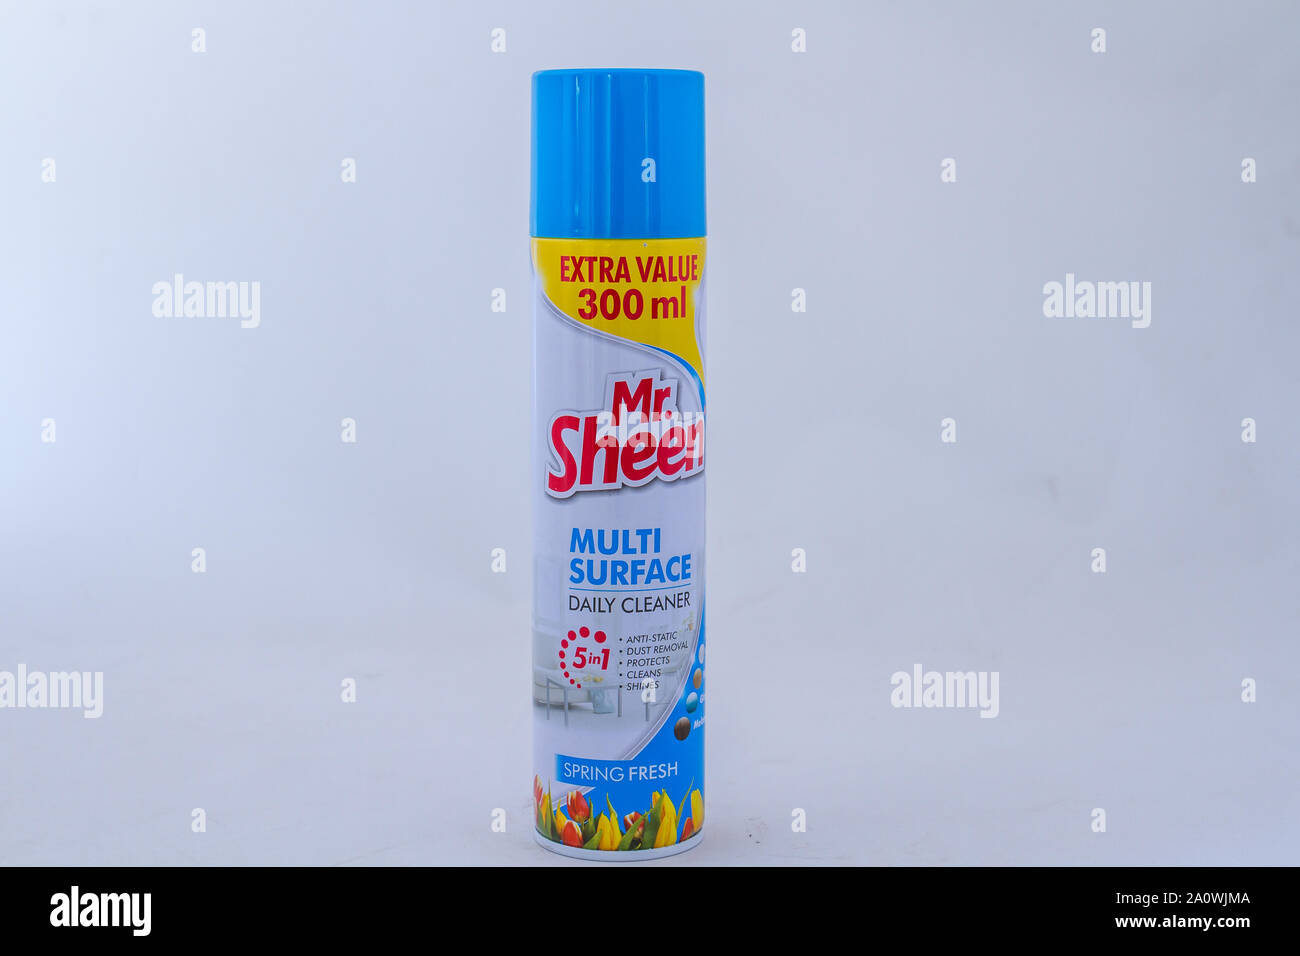 Alberton, South Africa - a can of Mr Sheen multi-surface household cleaner isolated on a white background image with copy space Stock Photo